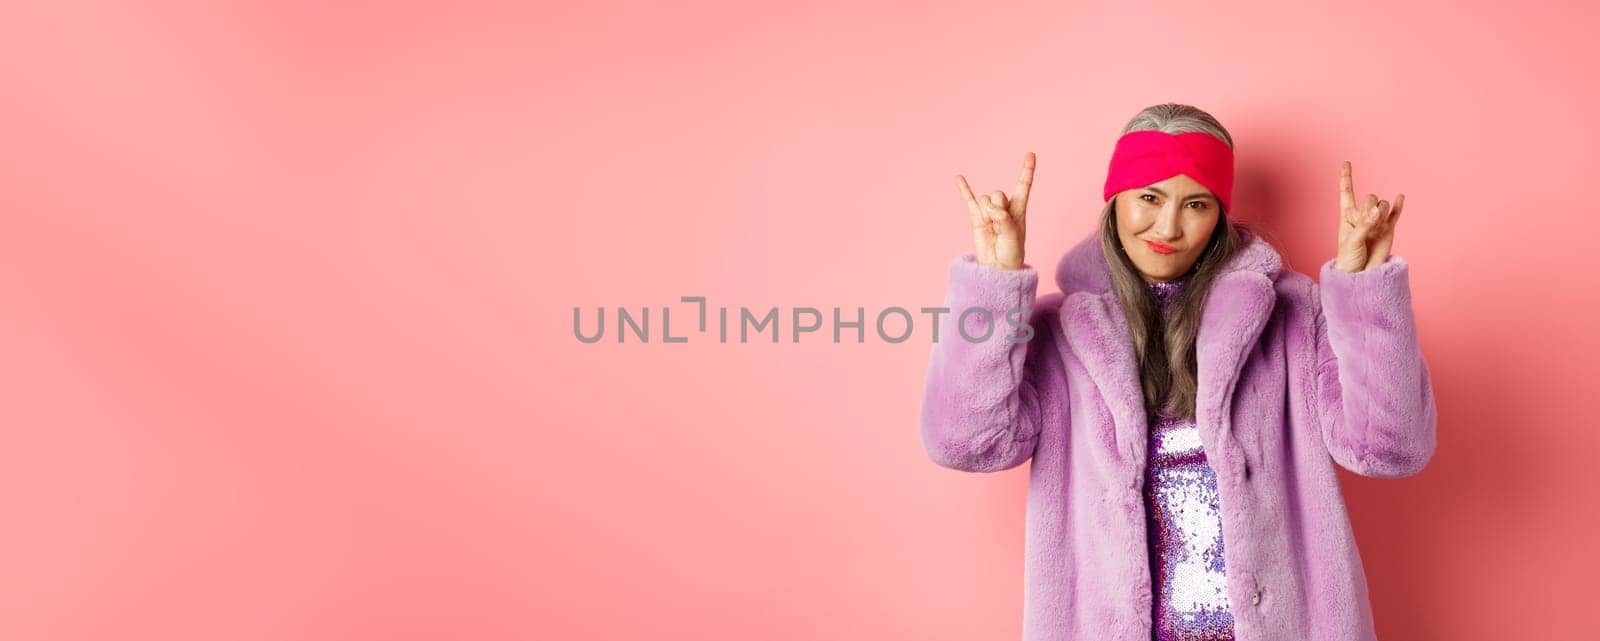 Cool asian mature woman in fashionable faux fur coat, showing rock-n-roll horns signs and smiling sassy at camera, having fun, standing over pink background.